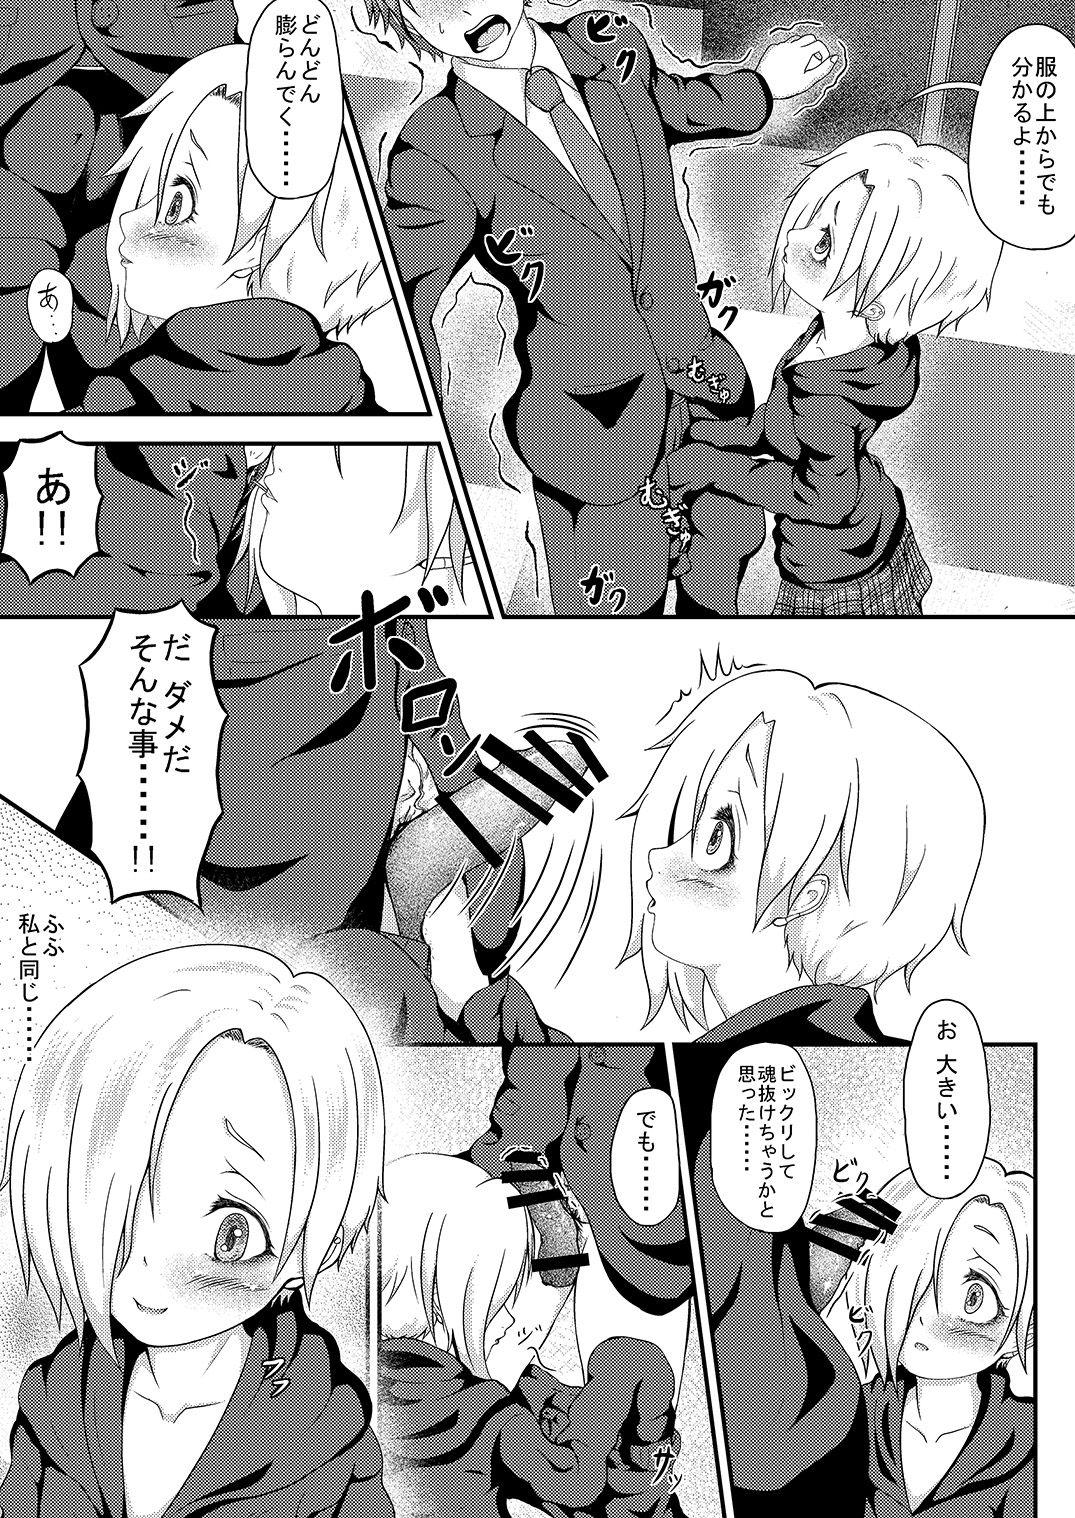 The H-aunting of Koume-chan 6